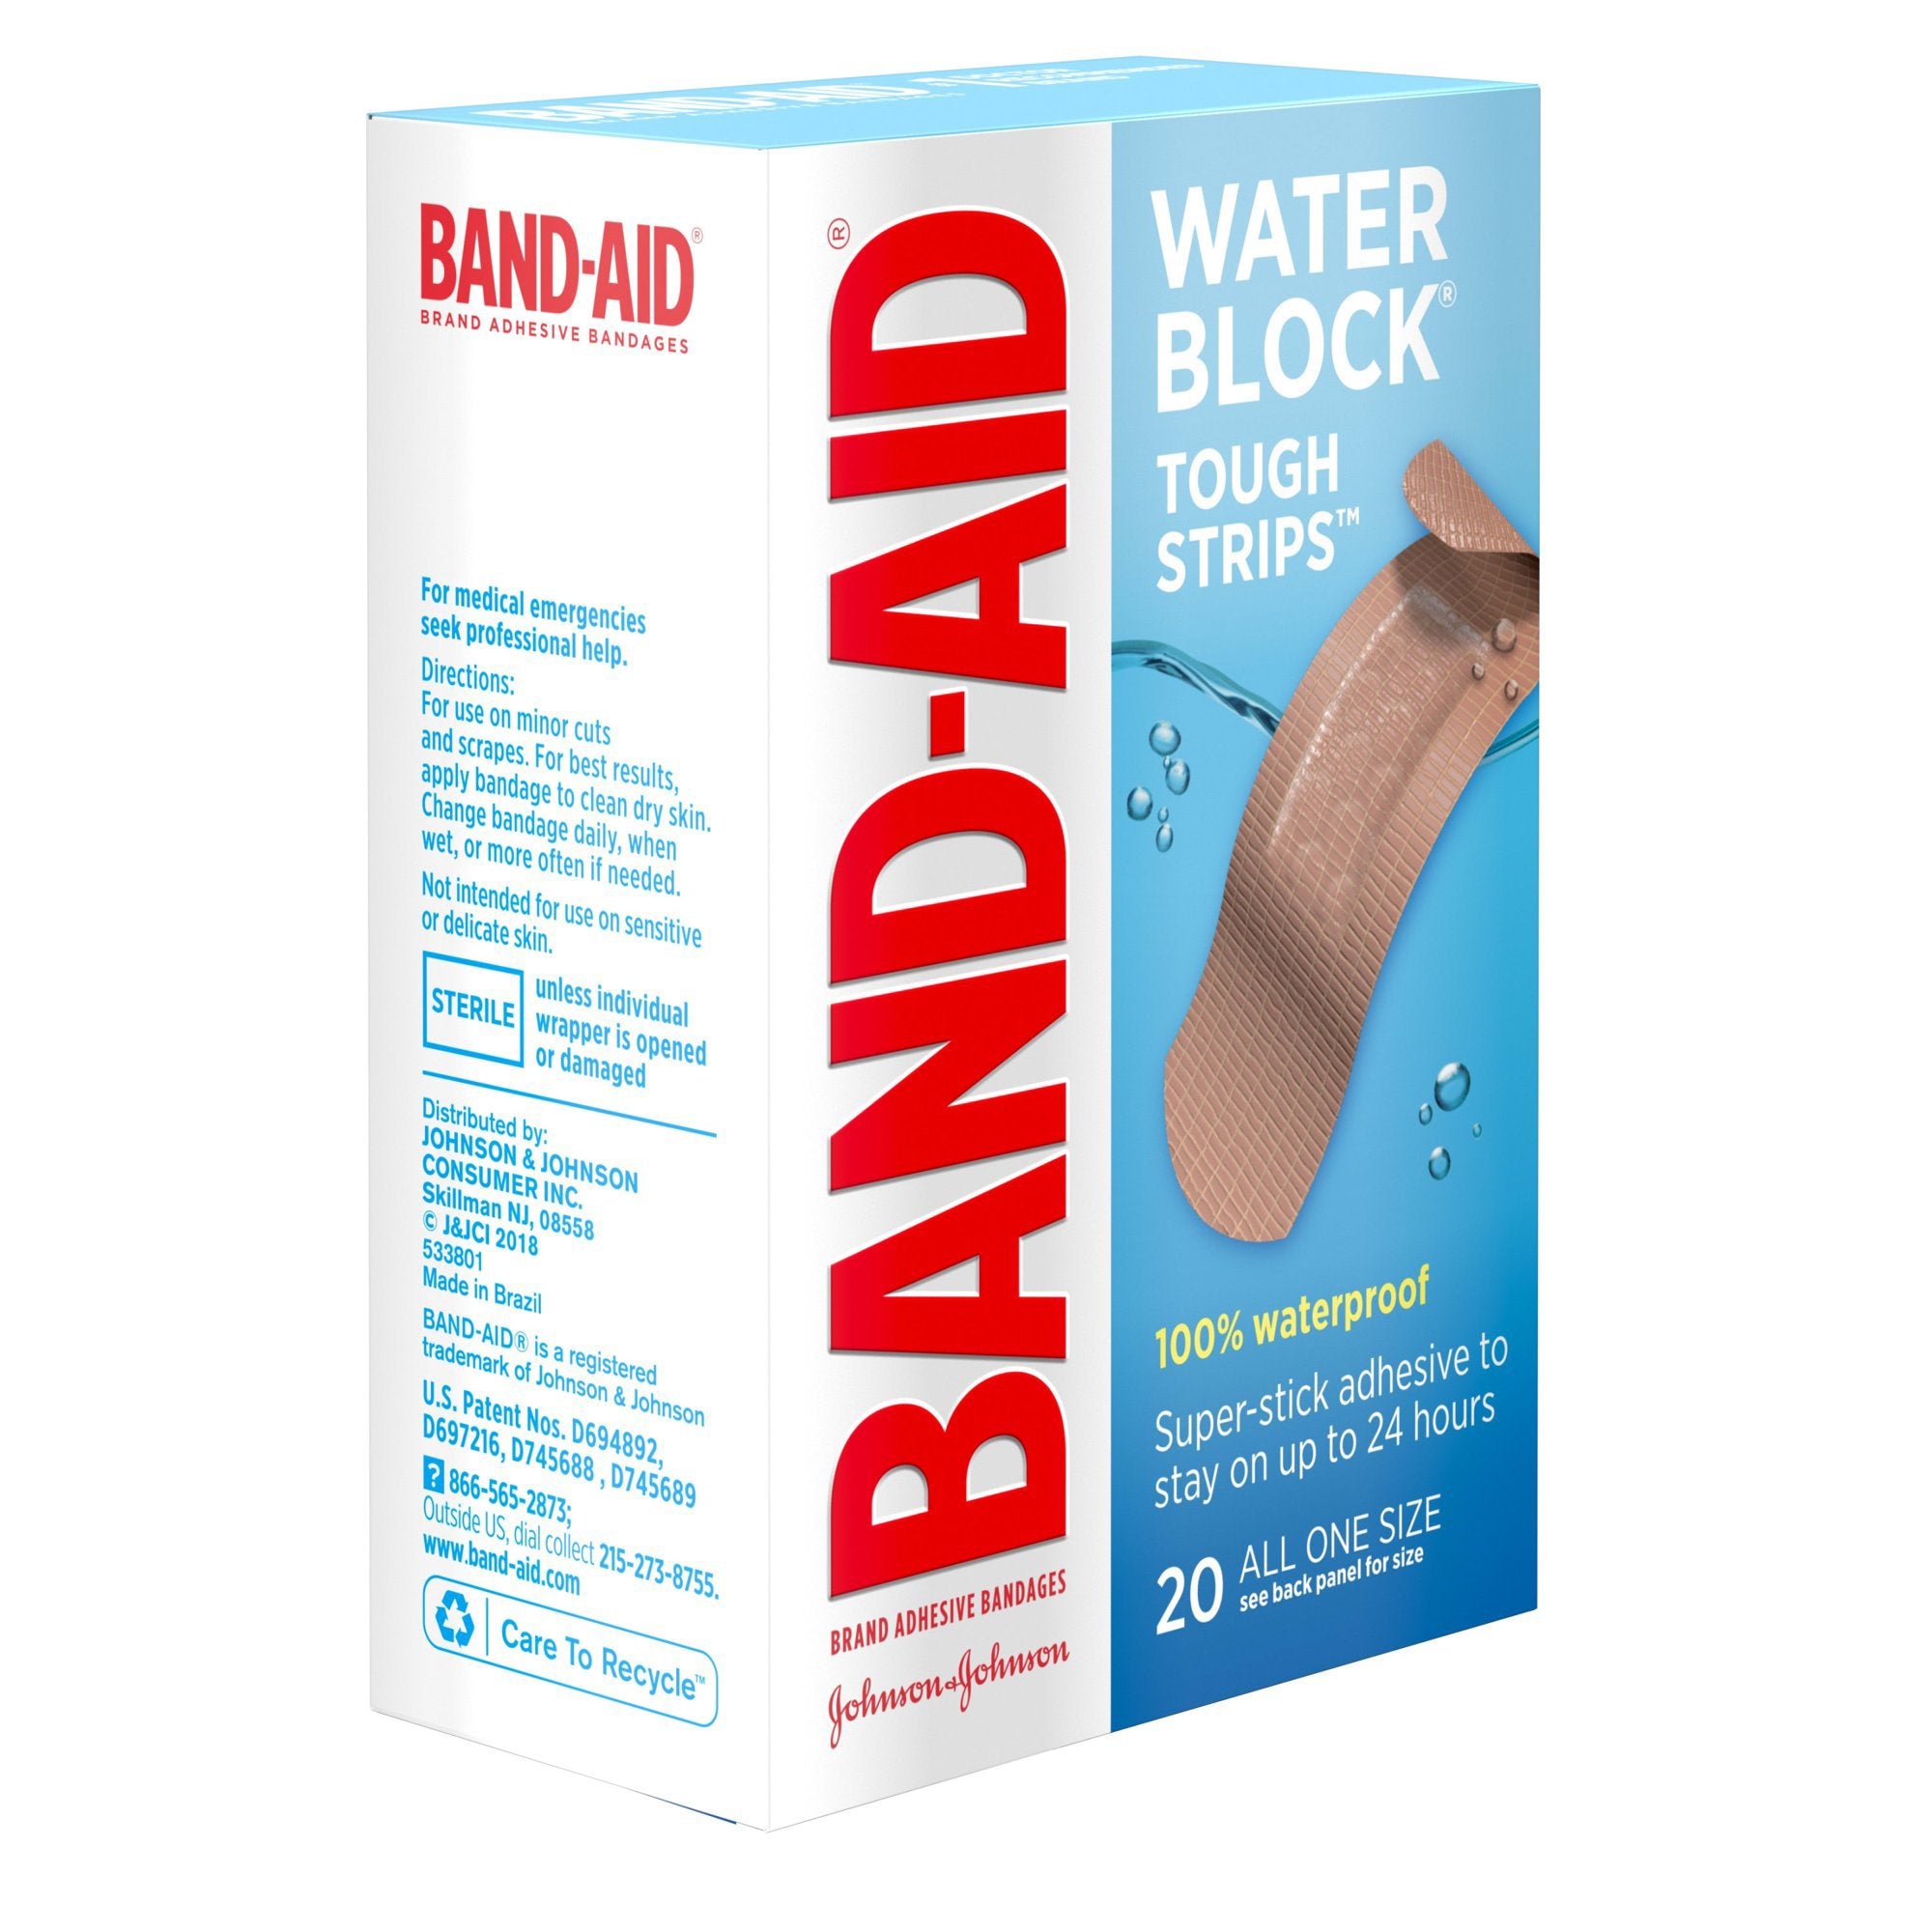 Adhesive Strip Band-Aid Water Block Tough Strips 1-3/4 X 4 Inch Plastic Rectangle Tan Sterile